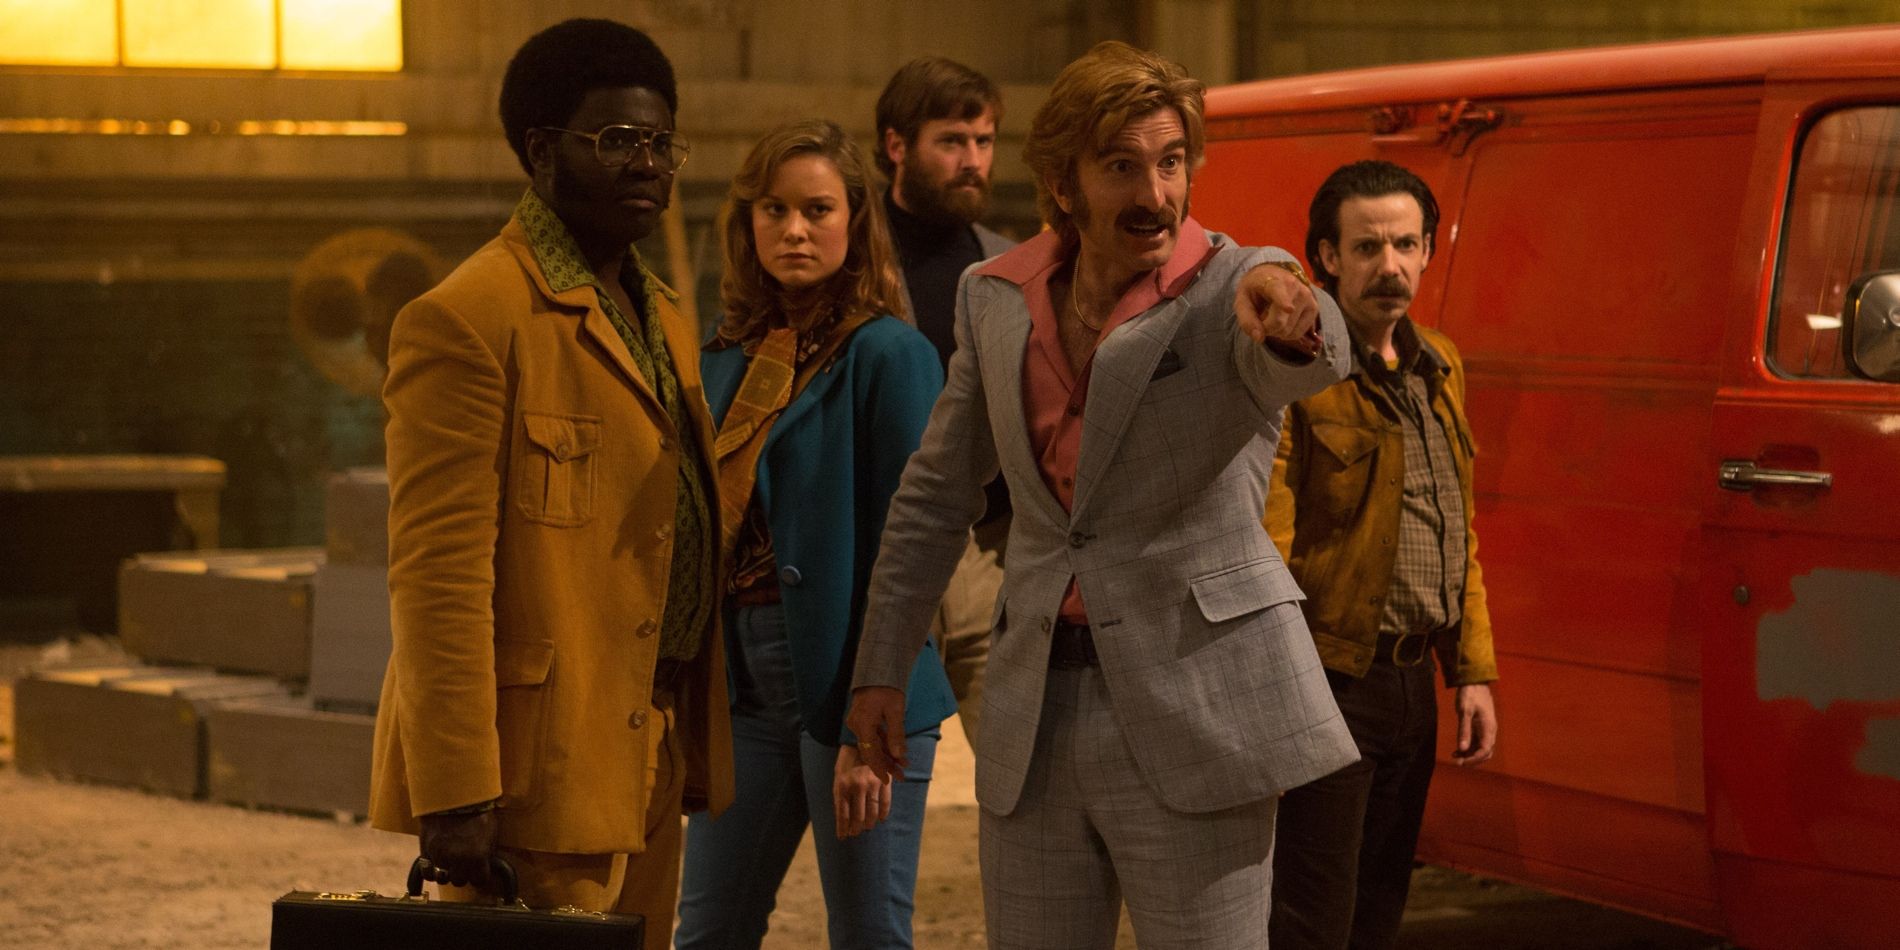 The main characters from the film Free Fire.